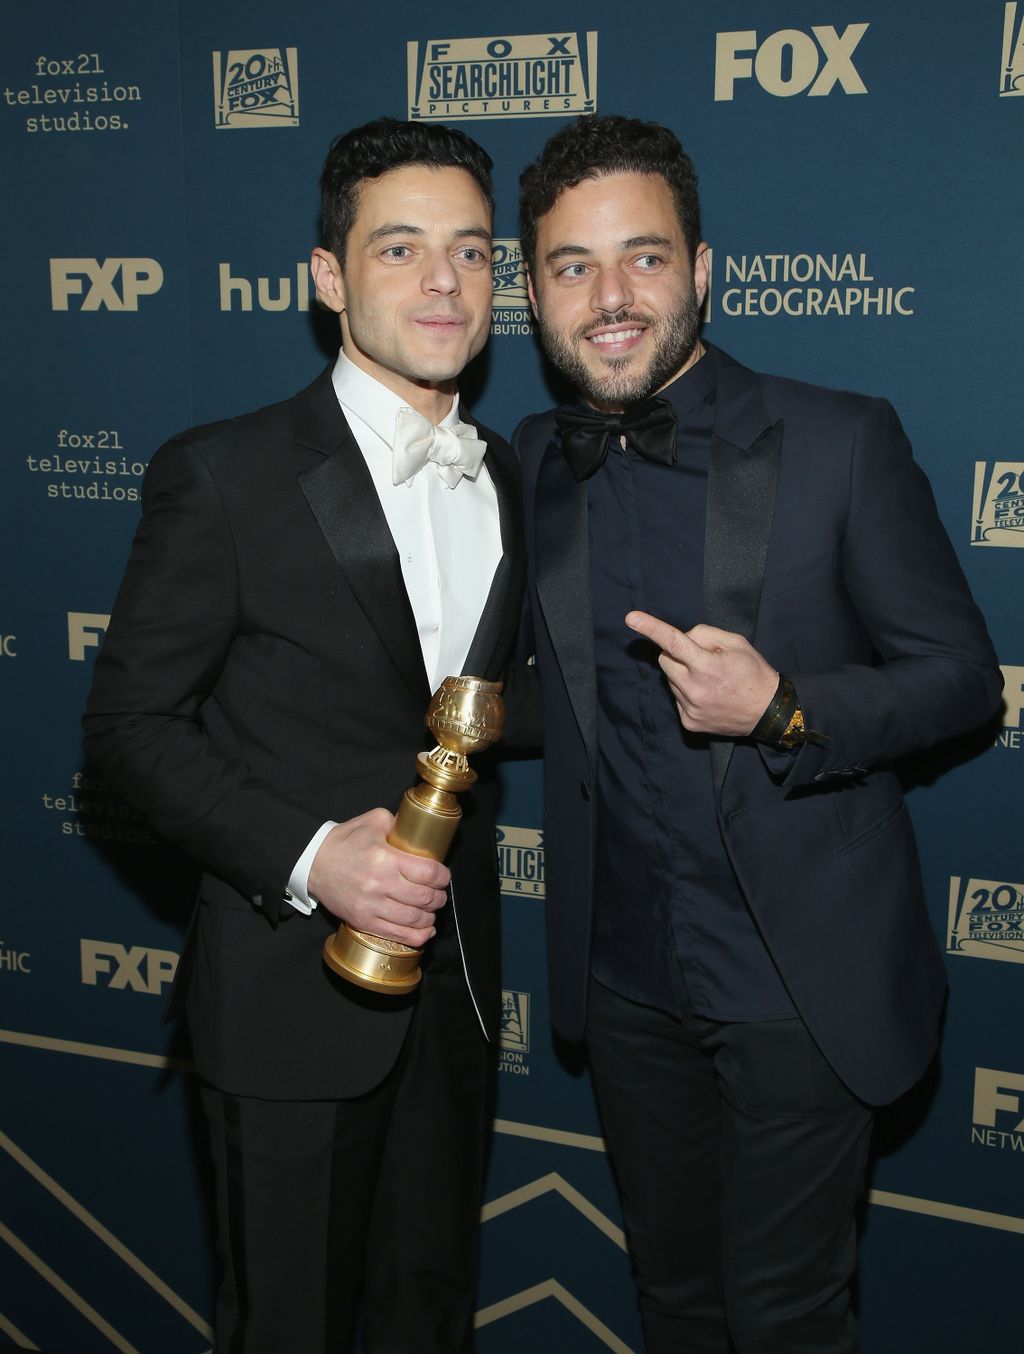 FOX, FX And Hulu 2019 Golden Globe Awards After Party - Inside GettyImageRank3 Arts Culture and Entertainment Celebrities 